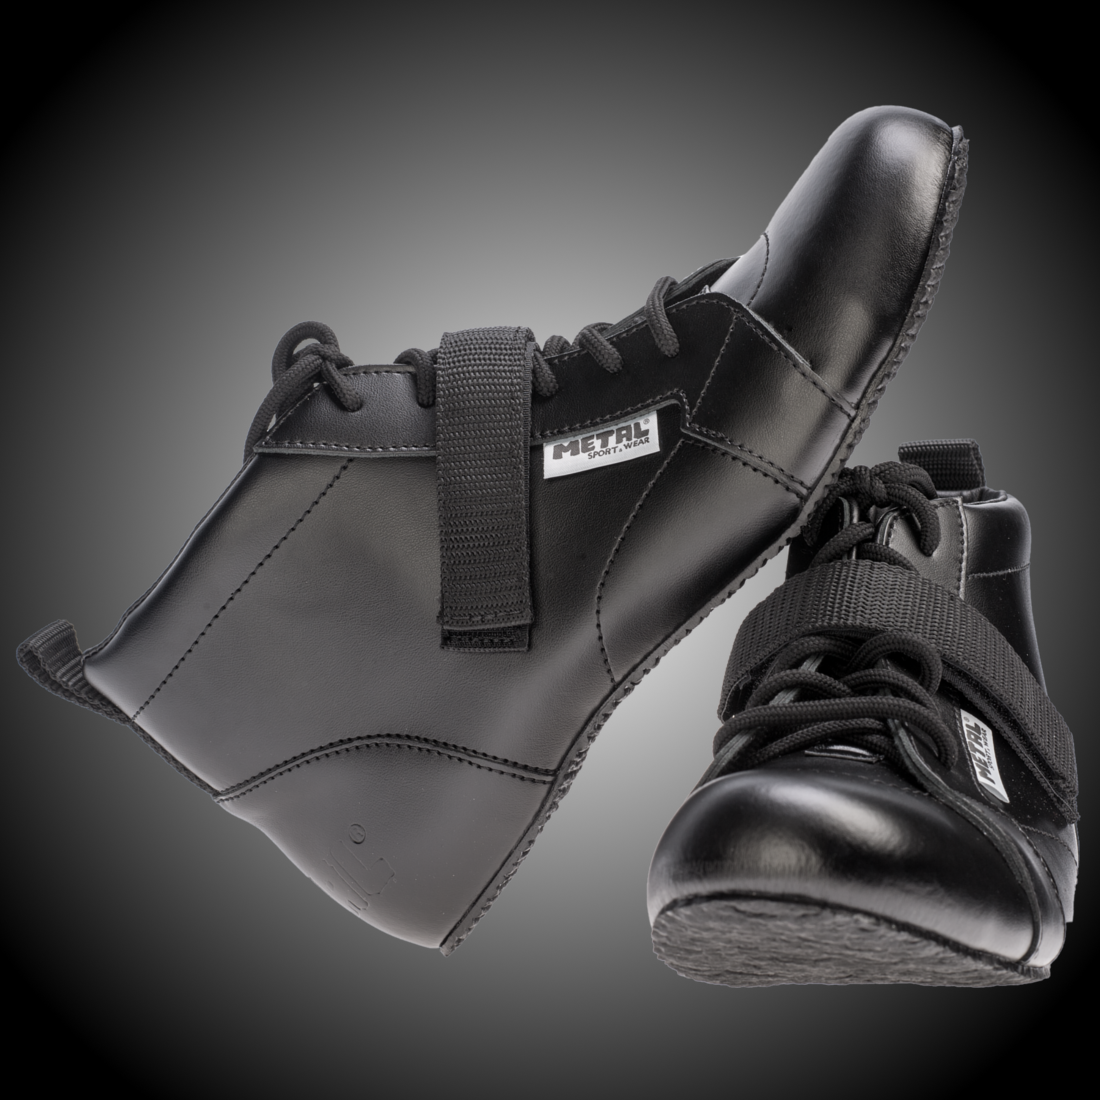 Dependence Melodious Social studies METAL Powerlifting Shoes - GOMETAL.COM